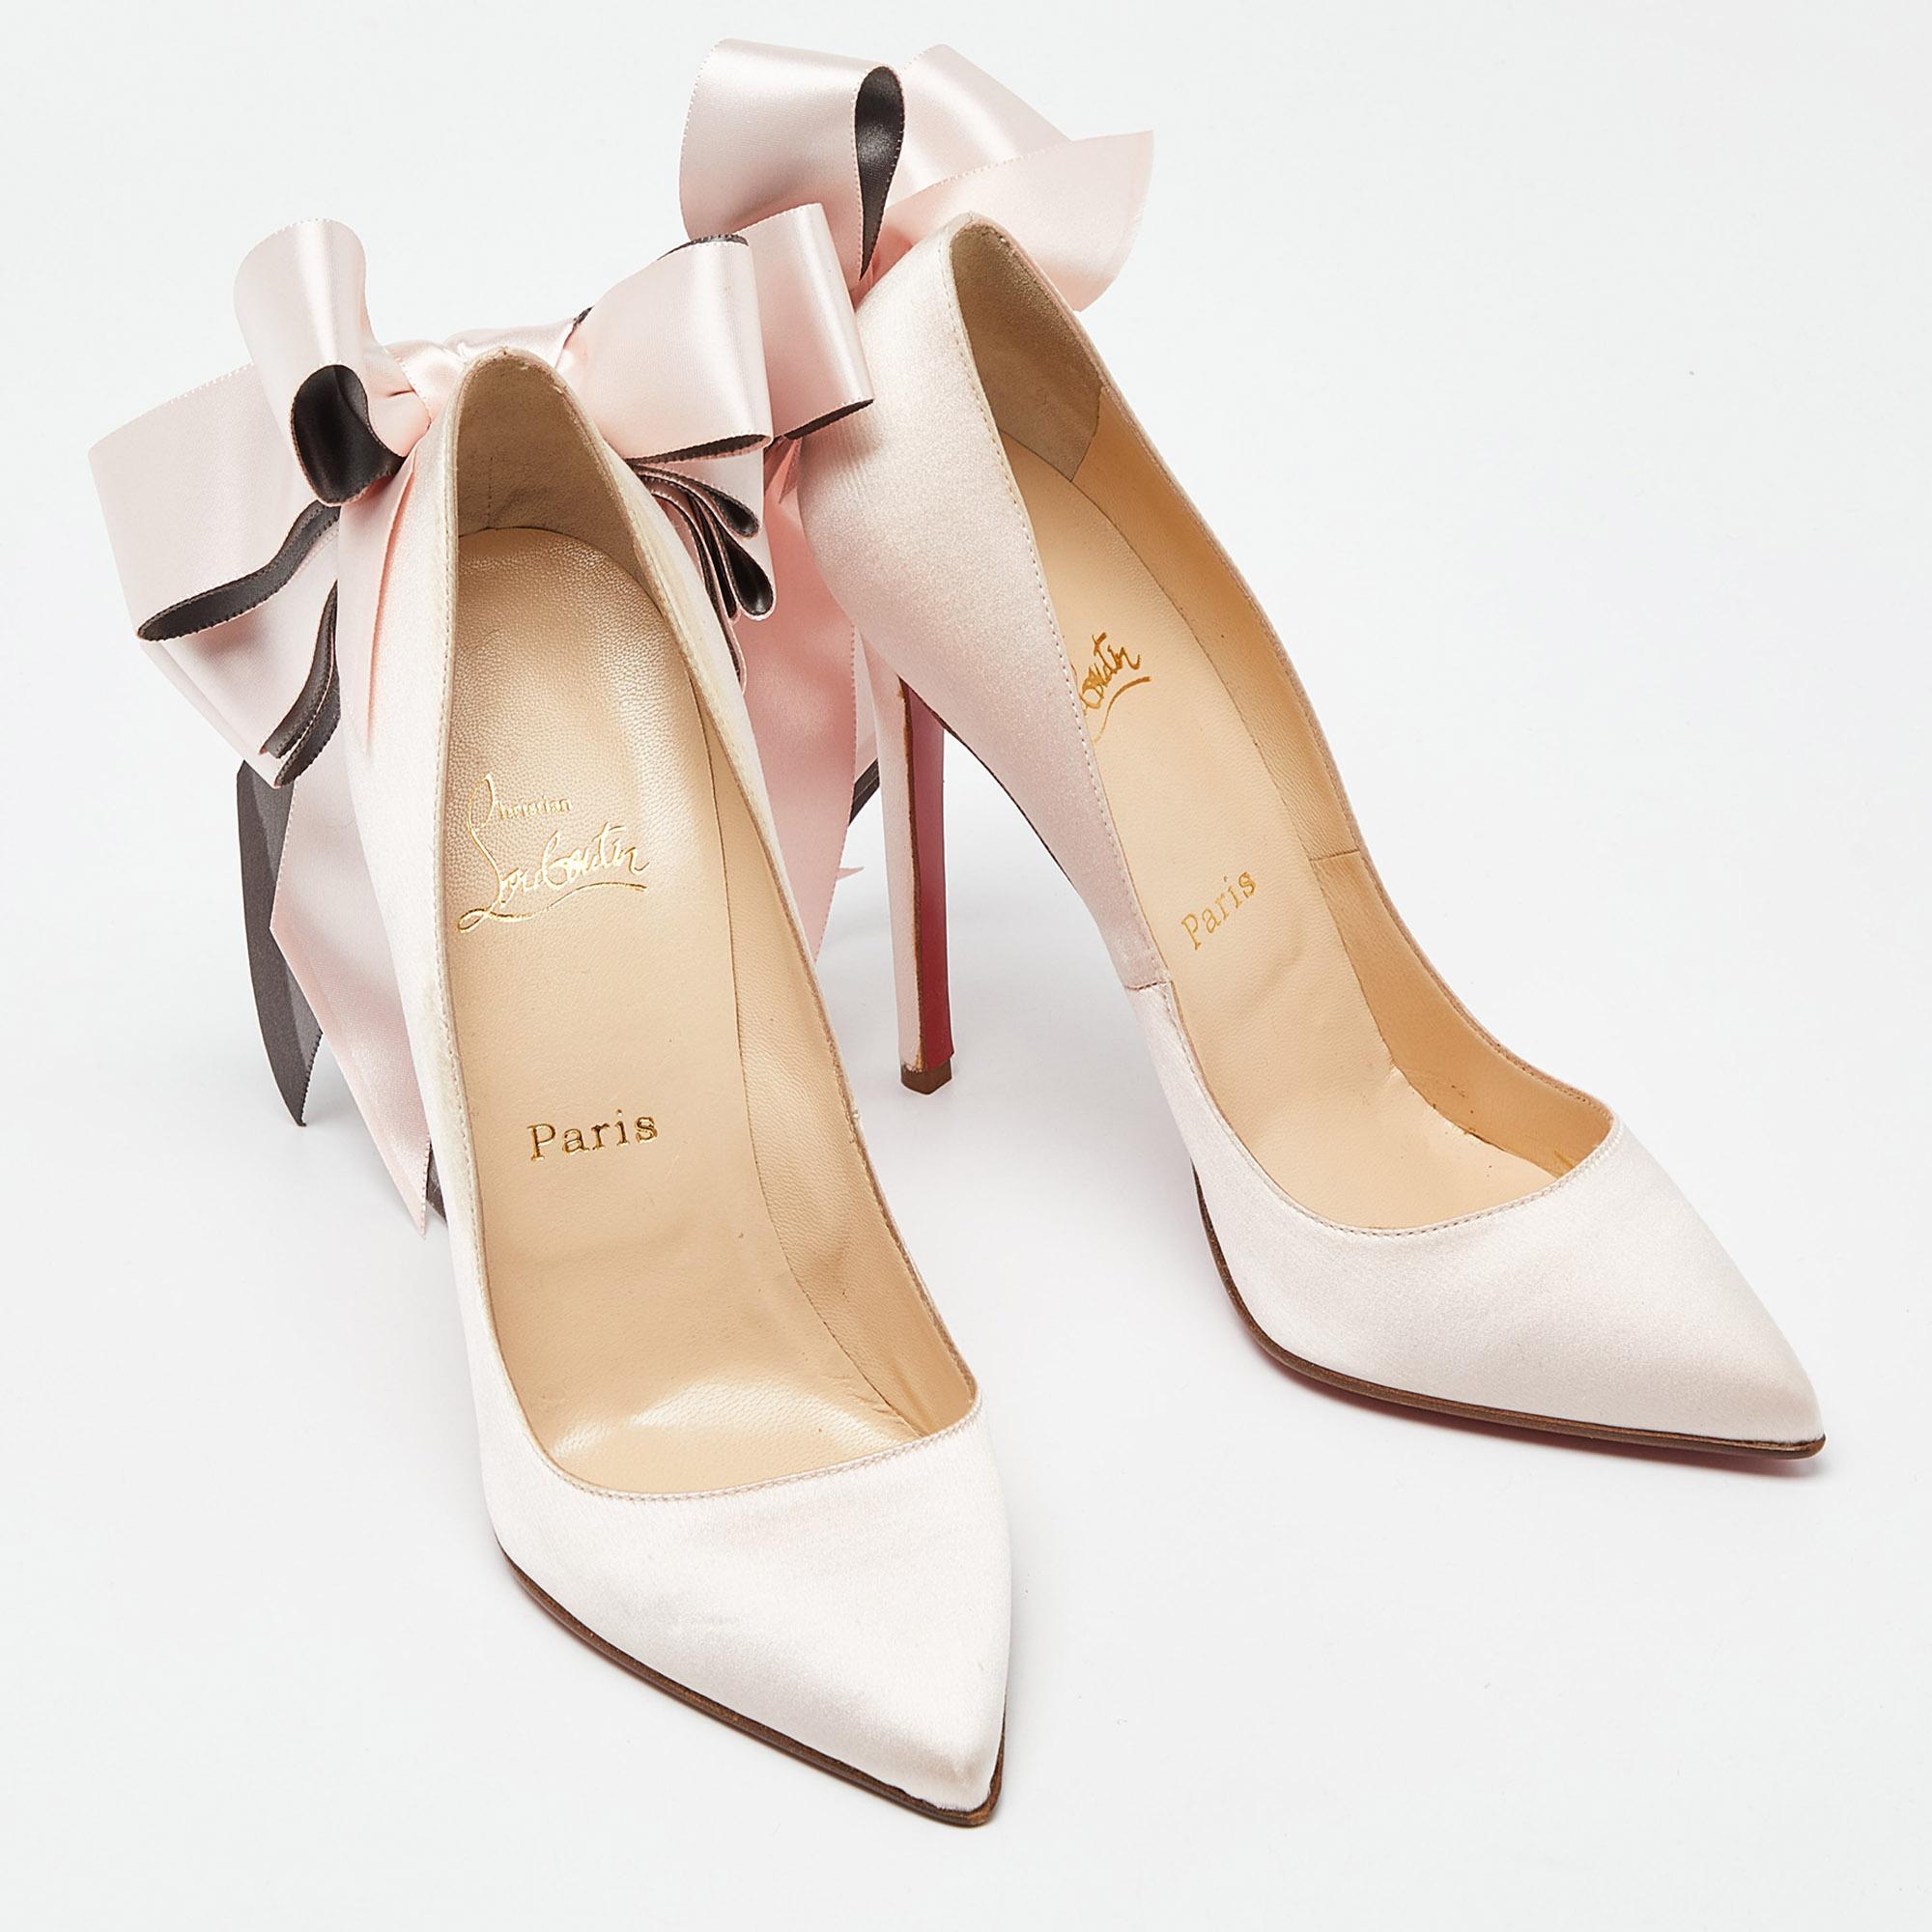 In delicate pink satin, the Christian Louboutin Anemone pumps exude femininity. The sleek silhouette is accentuated by a graceful bow detail, adding a touch of charm. With a classic pointed toe and a slender stiletto heel, these pumps effortlessly